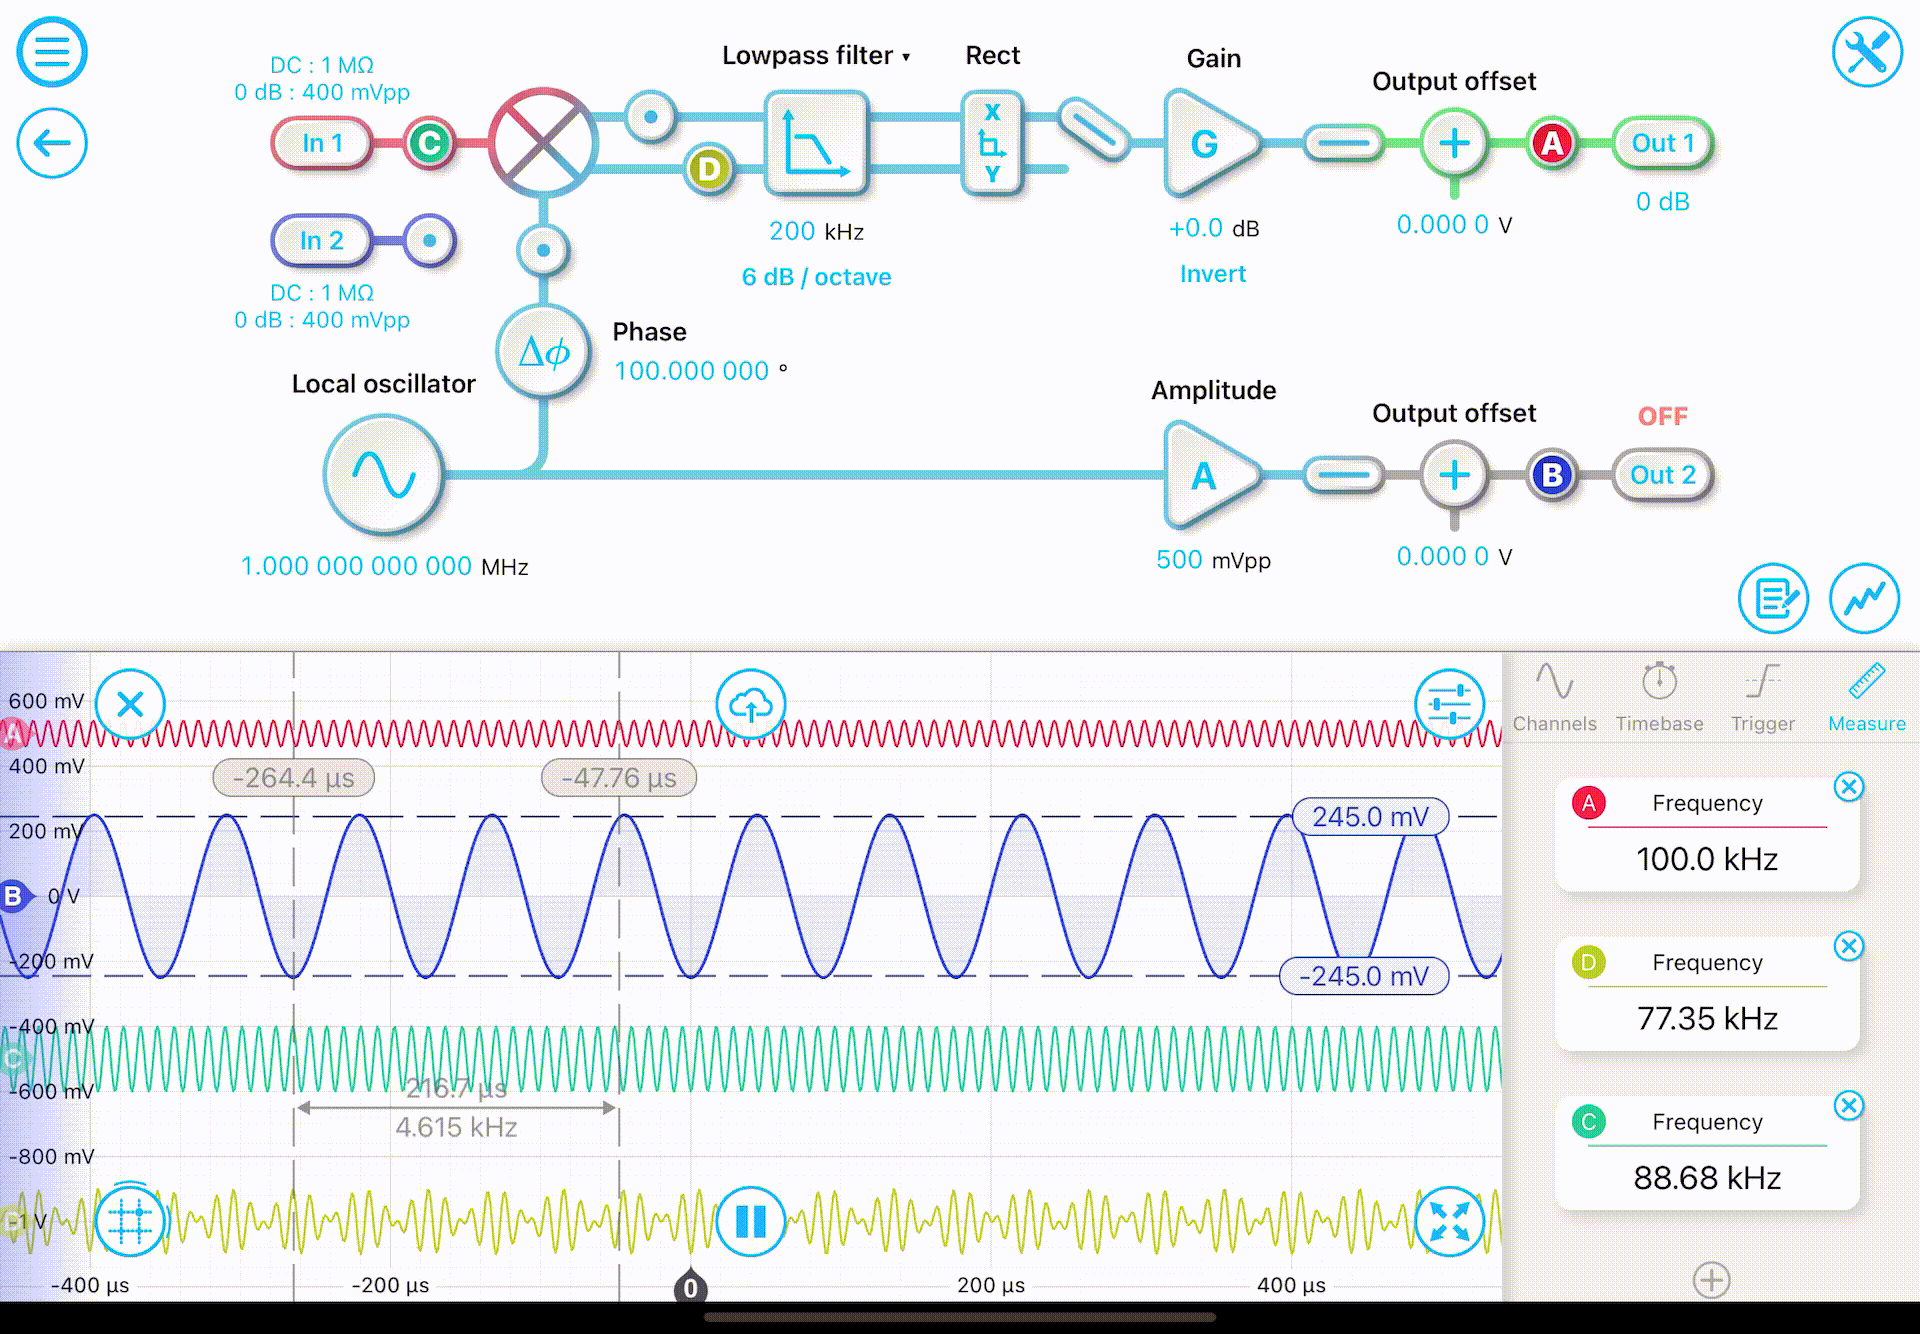 Schematic of a Phase-locked loop implemented in Moku:Pro